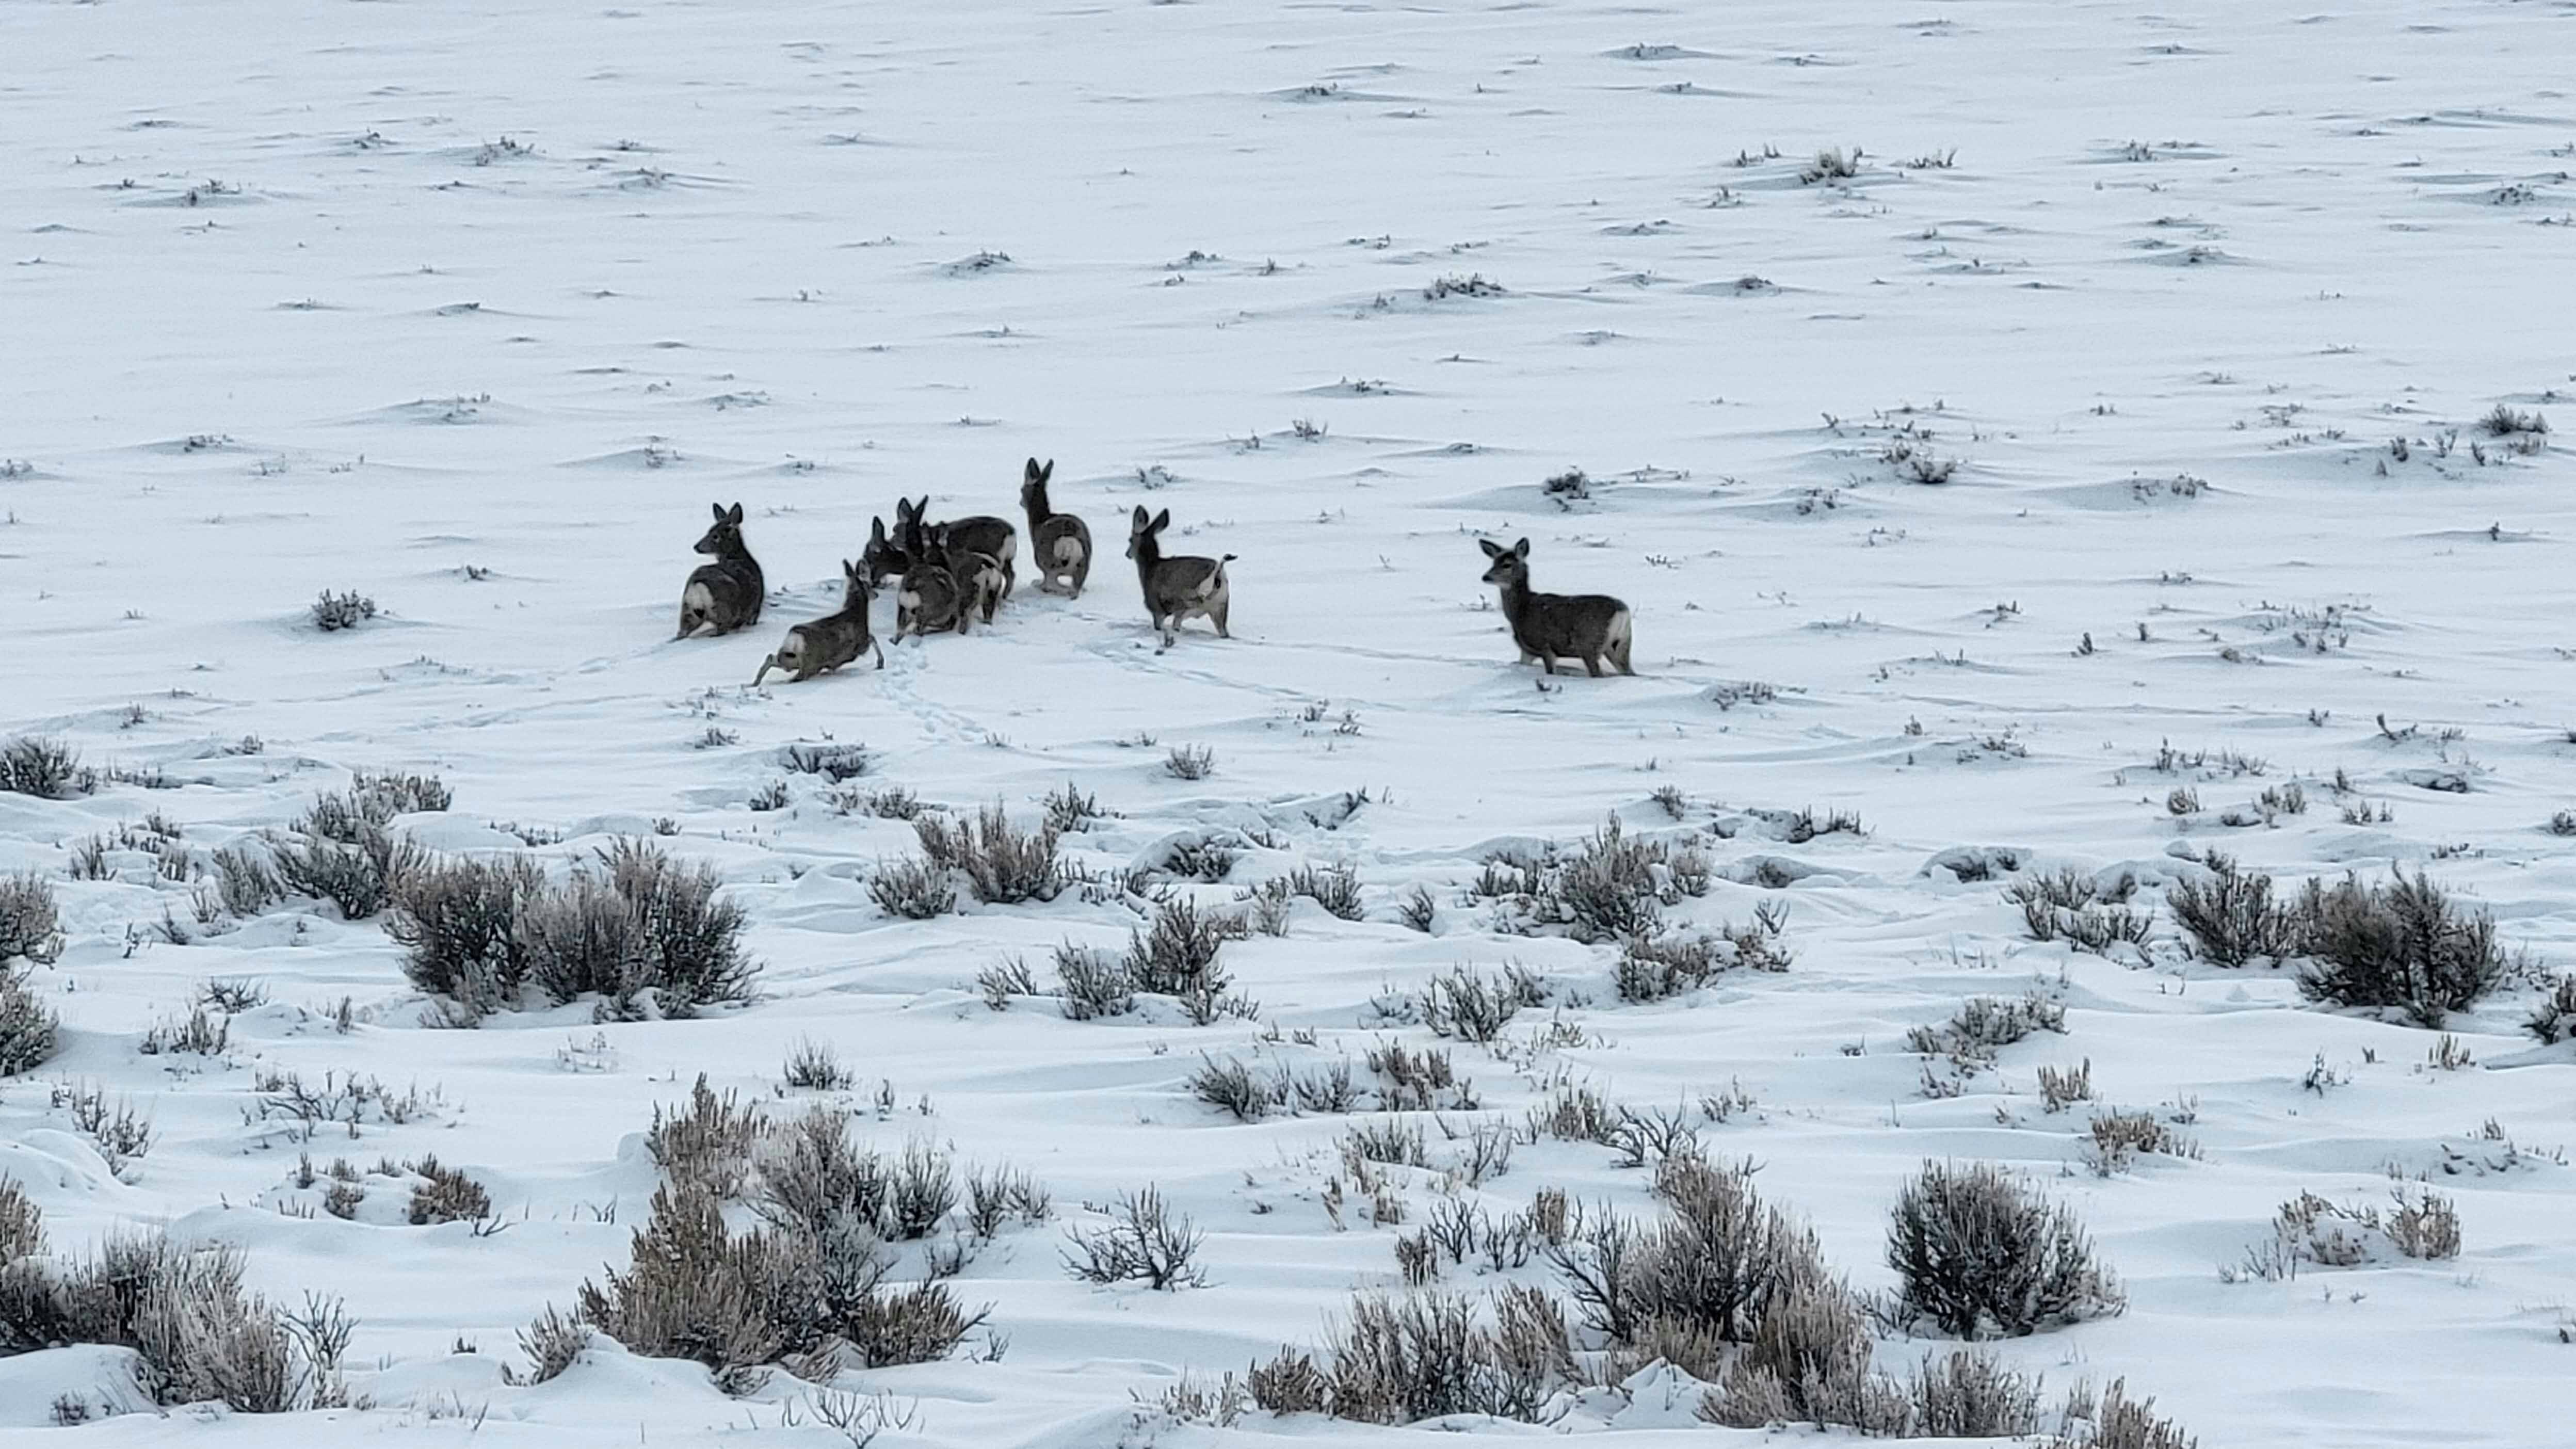 Mule deer from the Wyoming Range herd struggle to move about and find food, as much of their winter range is covered in deep, crusted snow.